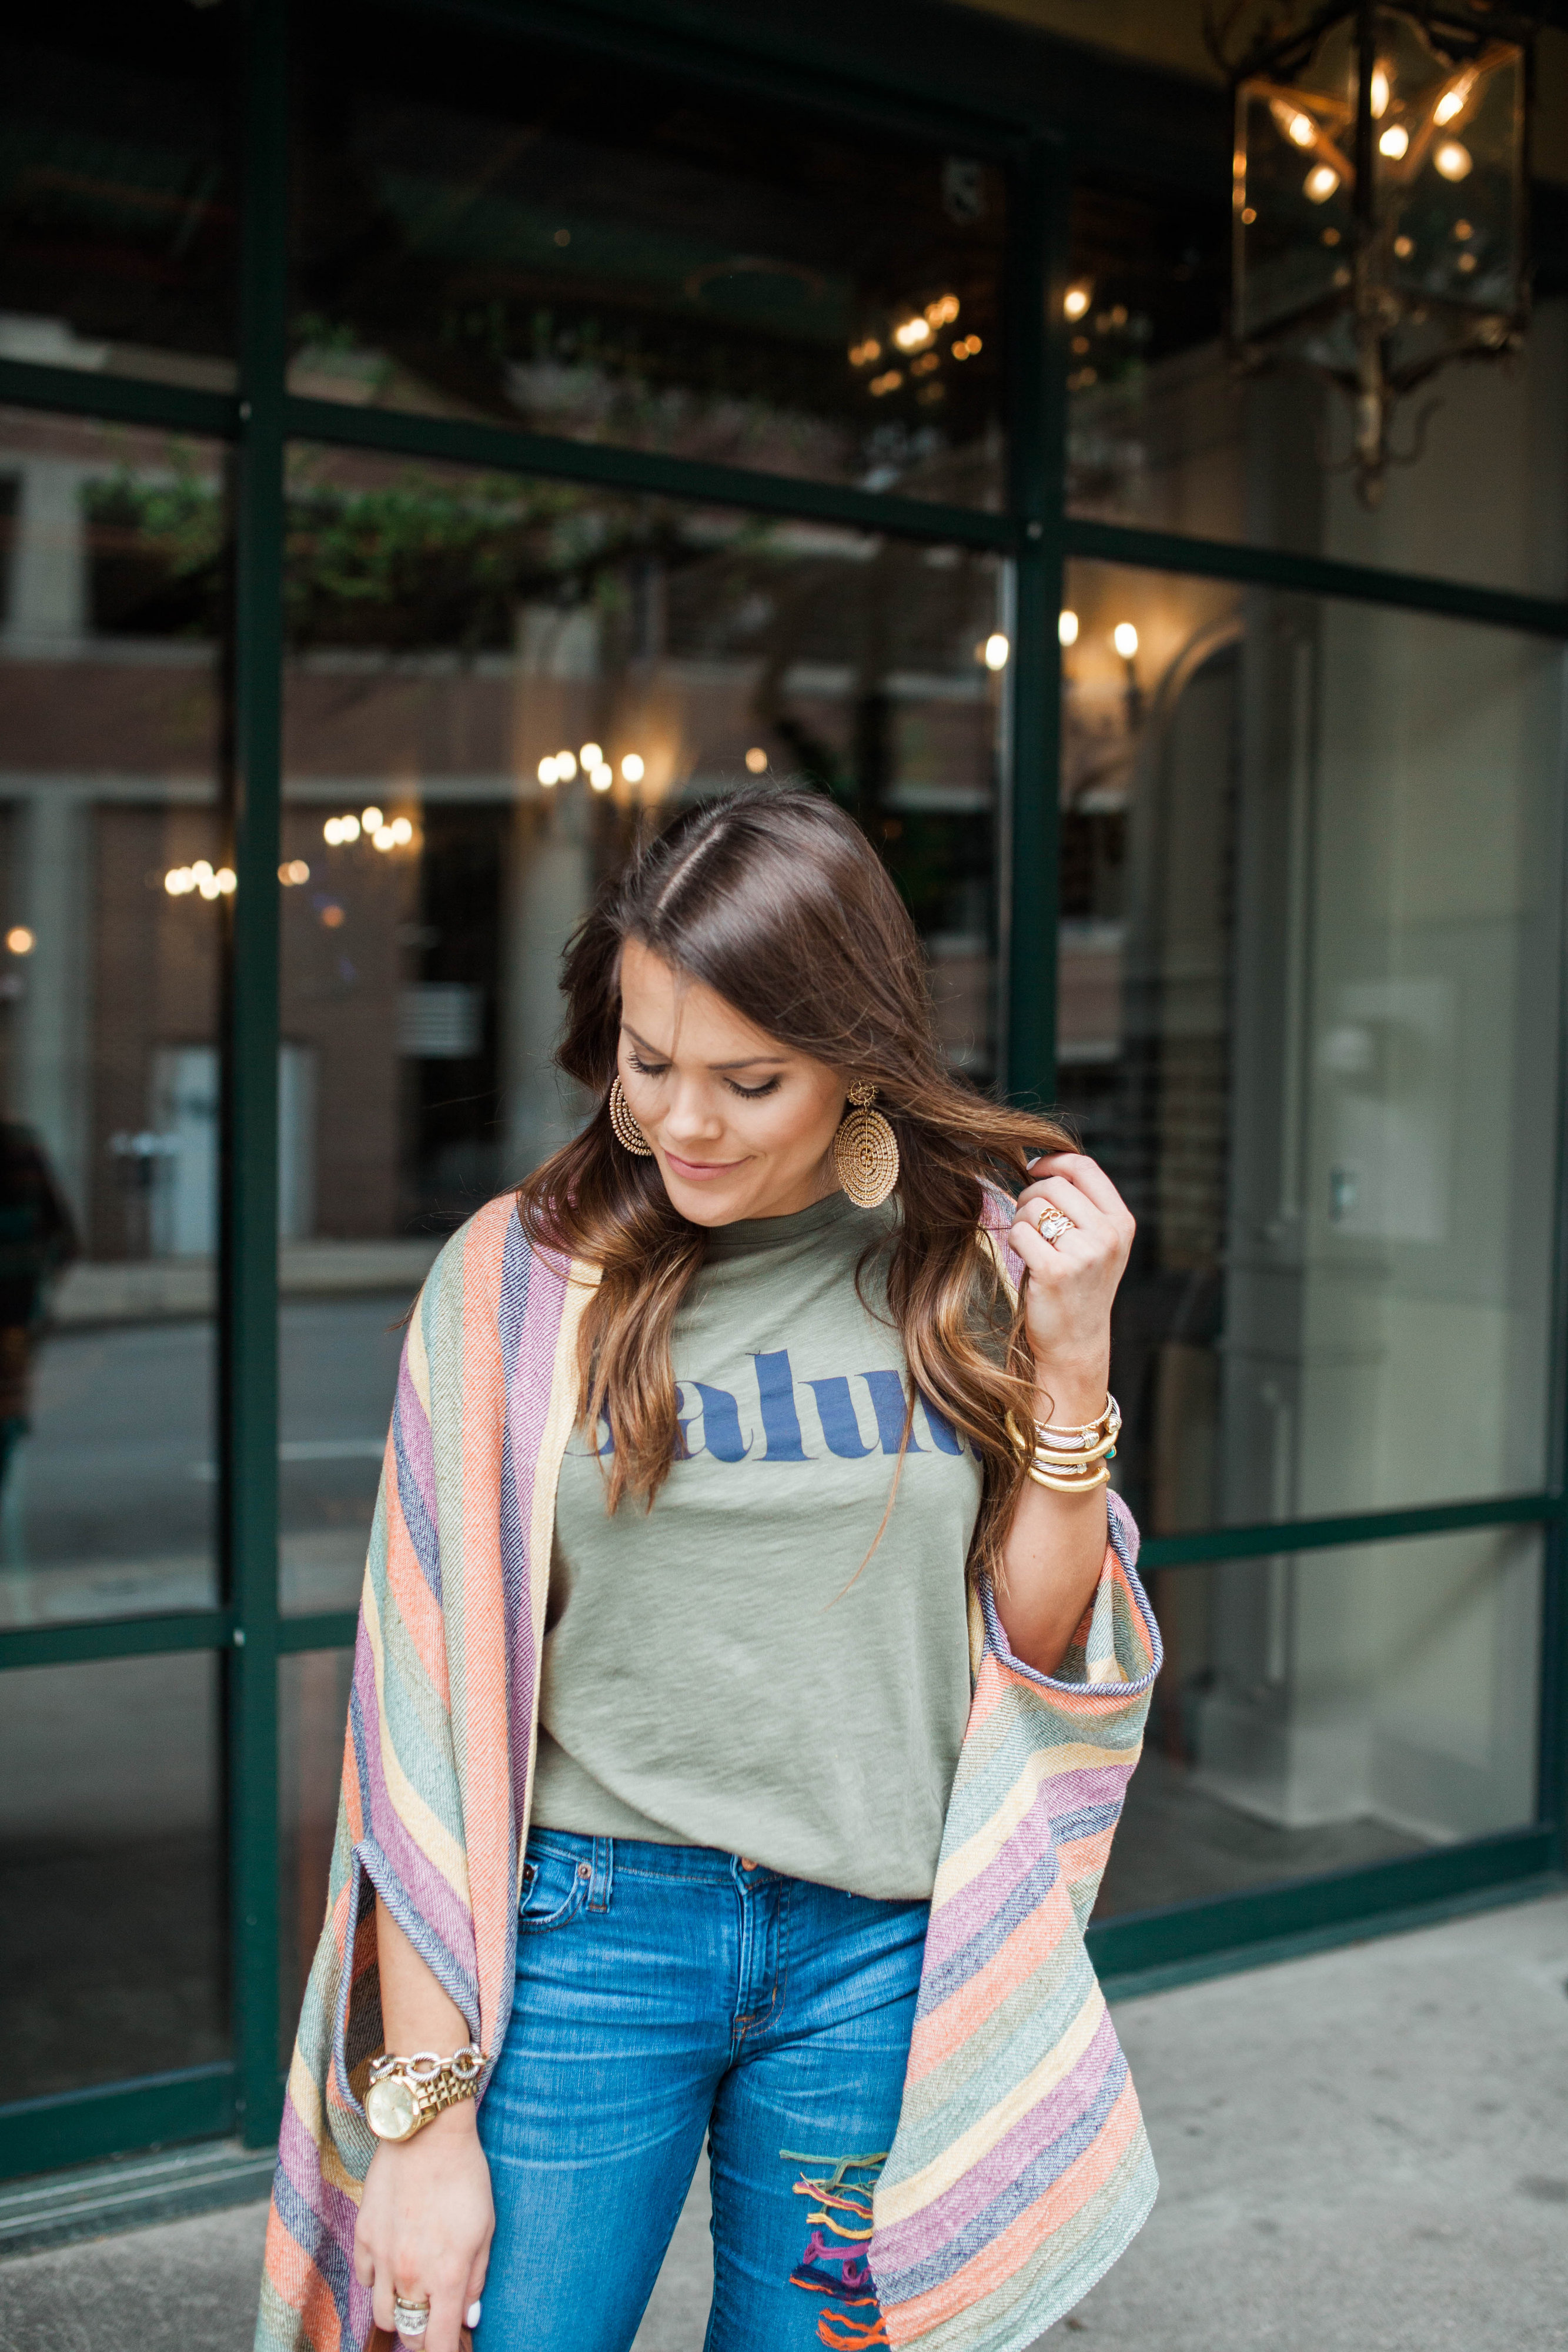 How to wear a graphic tee for spring